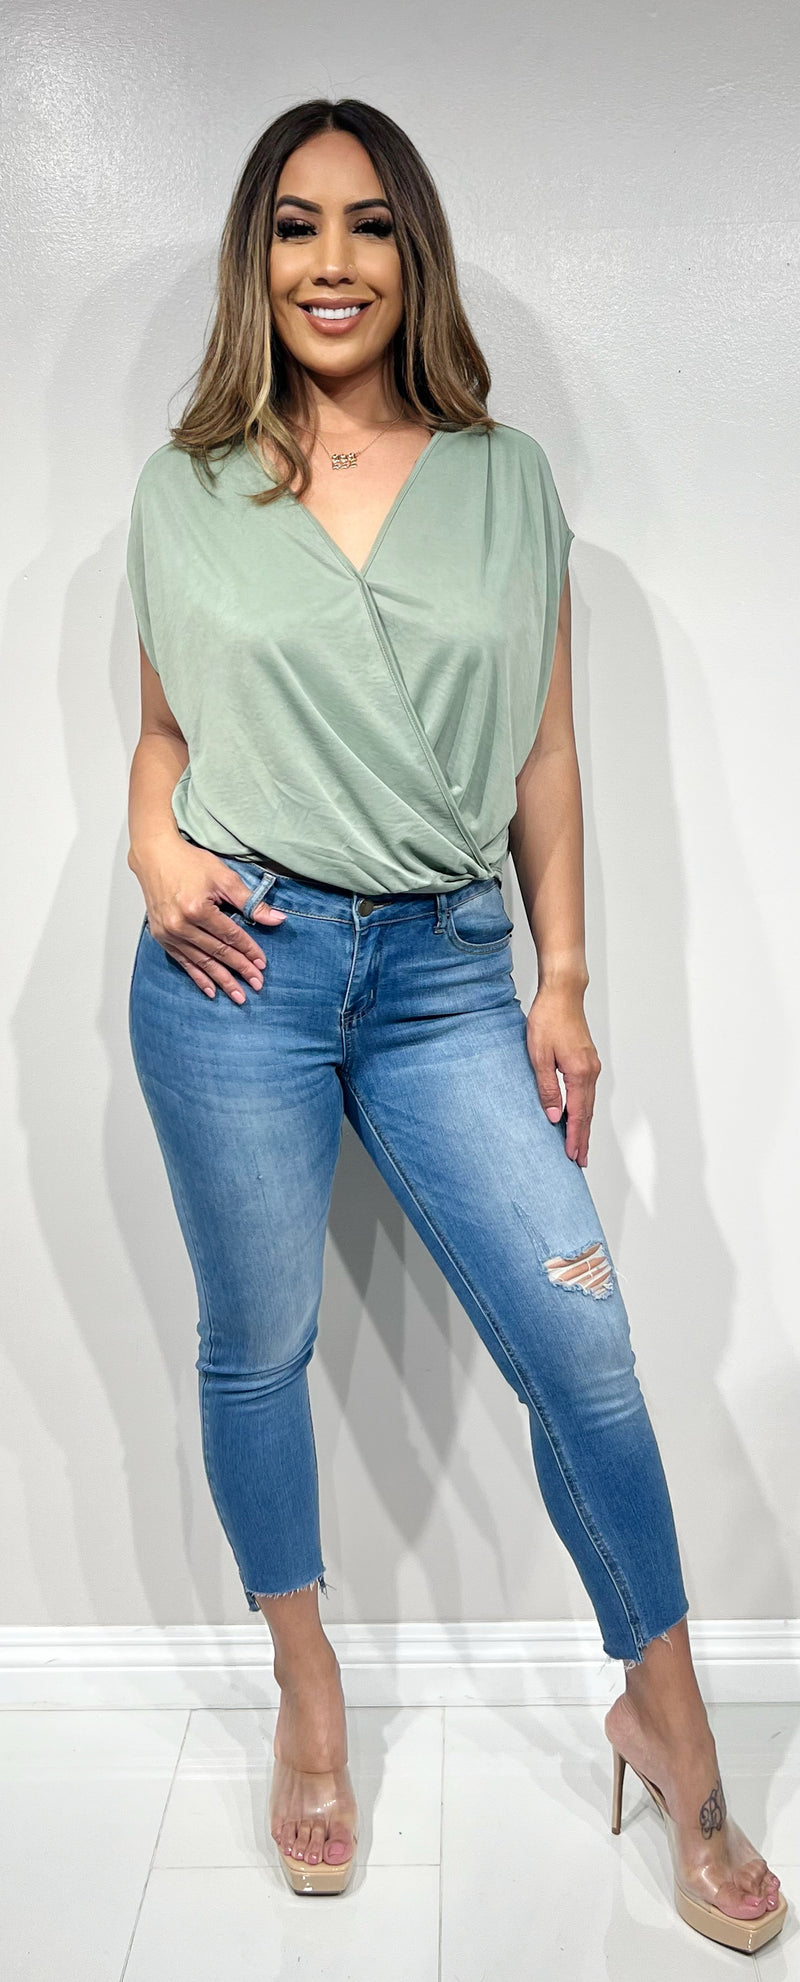 Jeans Warehouse Hawaii - S/S SOLID KNIT TOPS - V-NECK SURPLICE TOP | By CHERISH